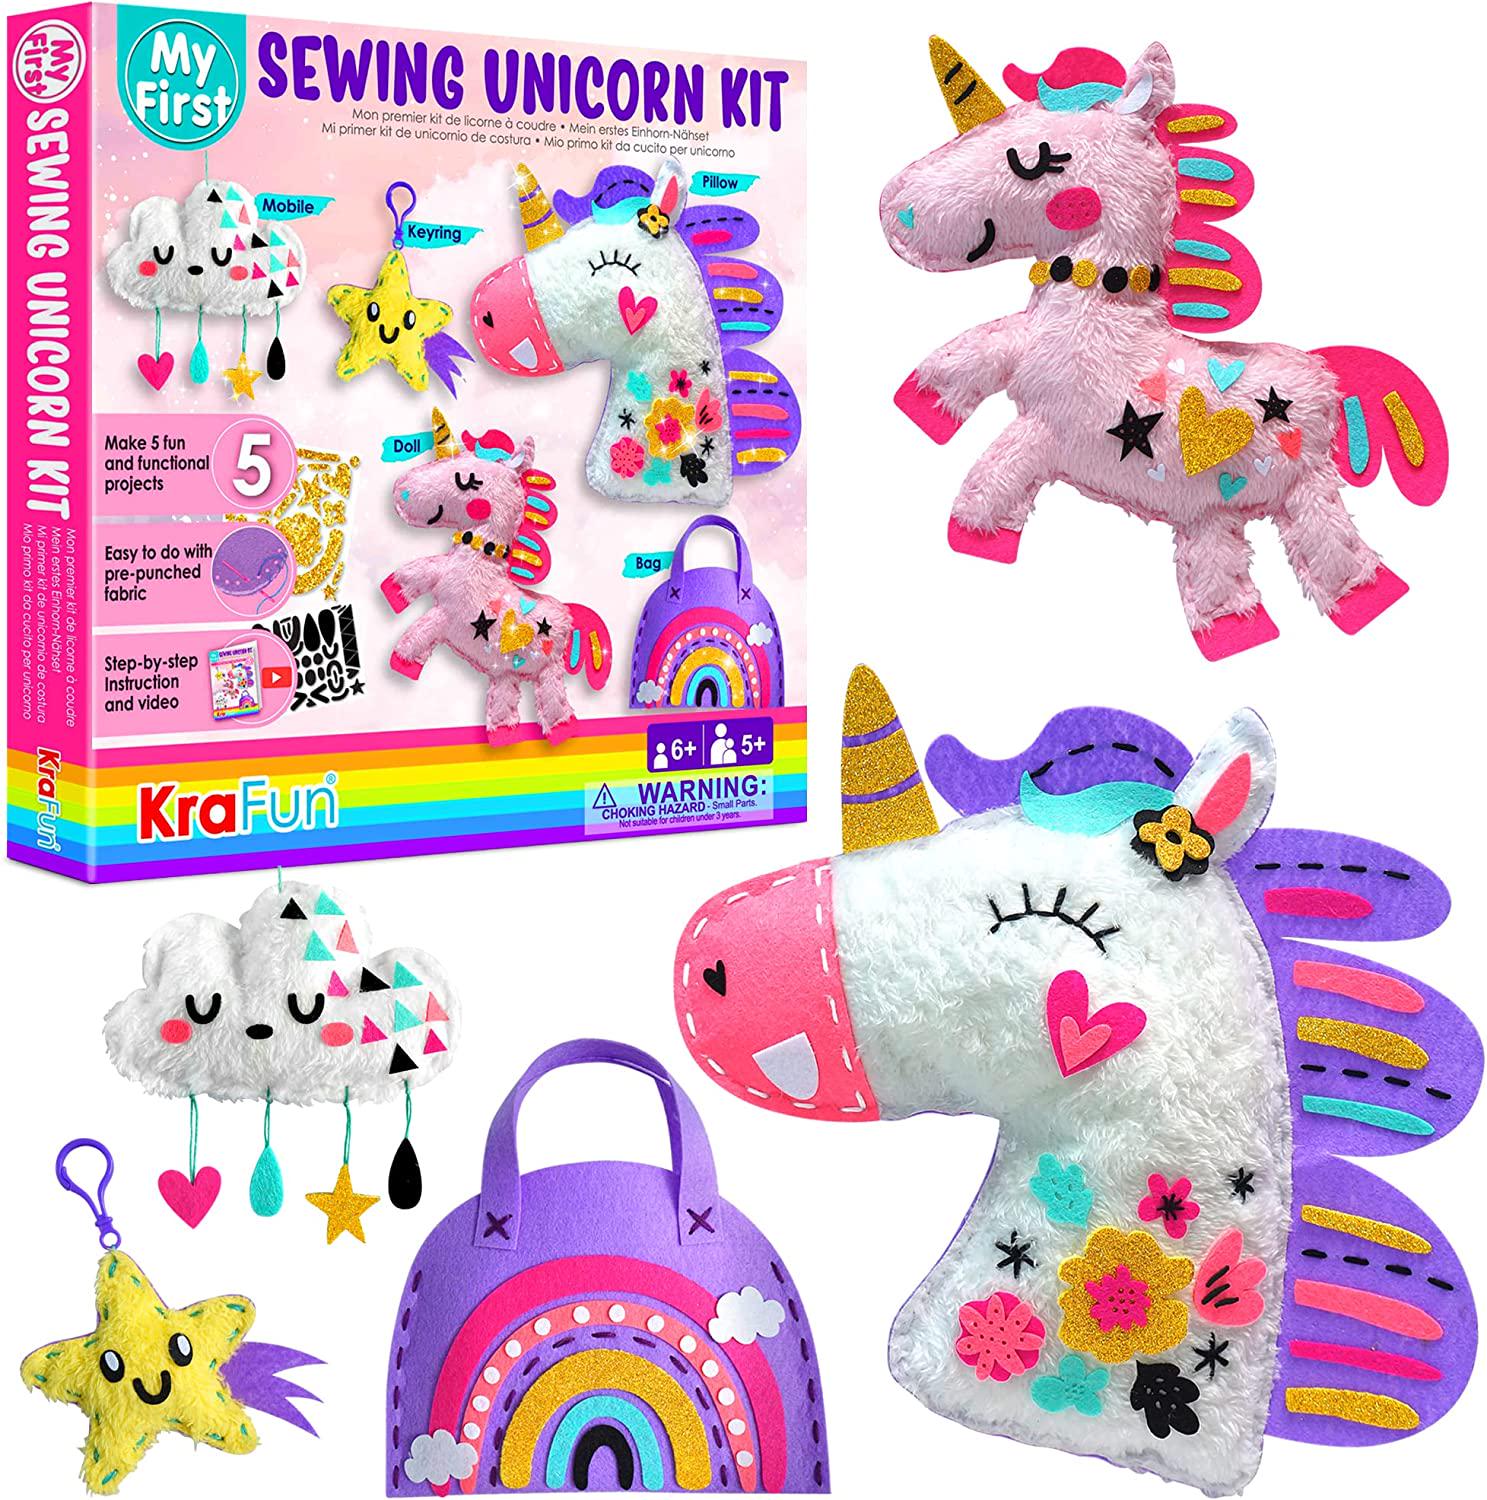 KRAFUN, KRAFUN My First Unicorn Kids Sewing kit, Beginner Arts and Crafts, Make 5 Cute Projects with Plush Stuffed Animal, Pillow, Mobile, Keyring and Bag, Instructions and Felt for Learn Sewing, Embroidery